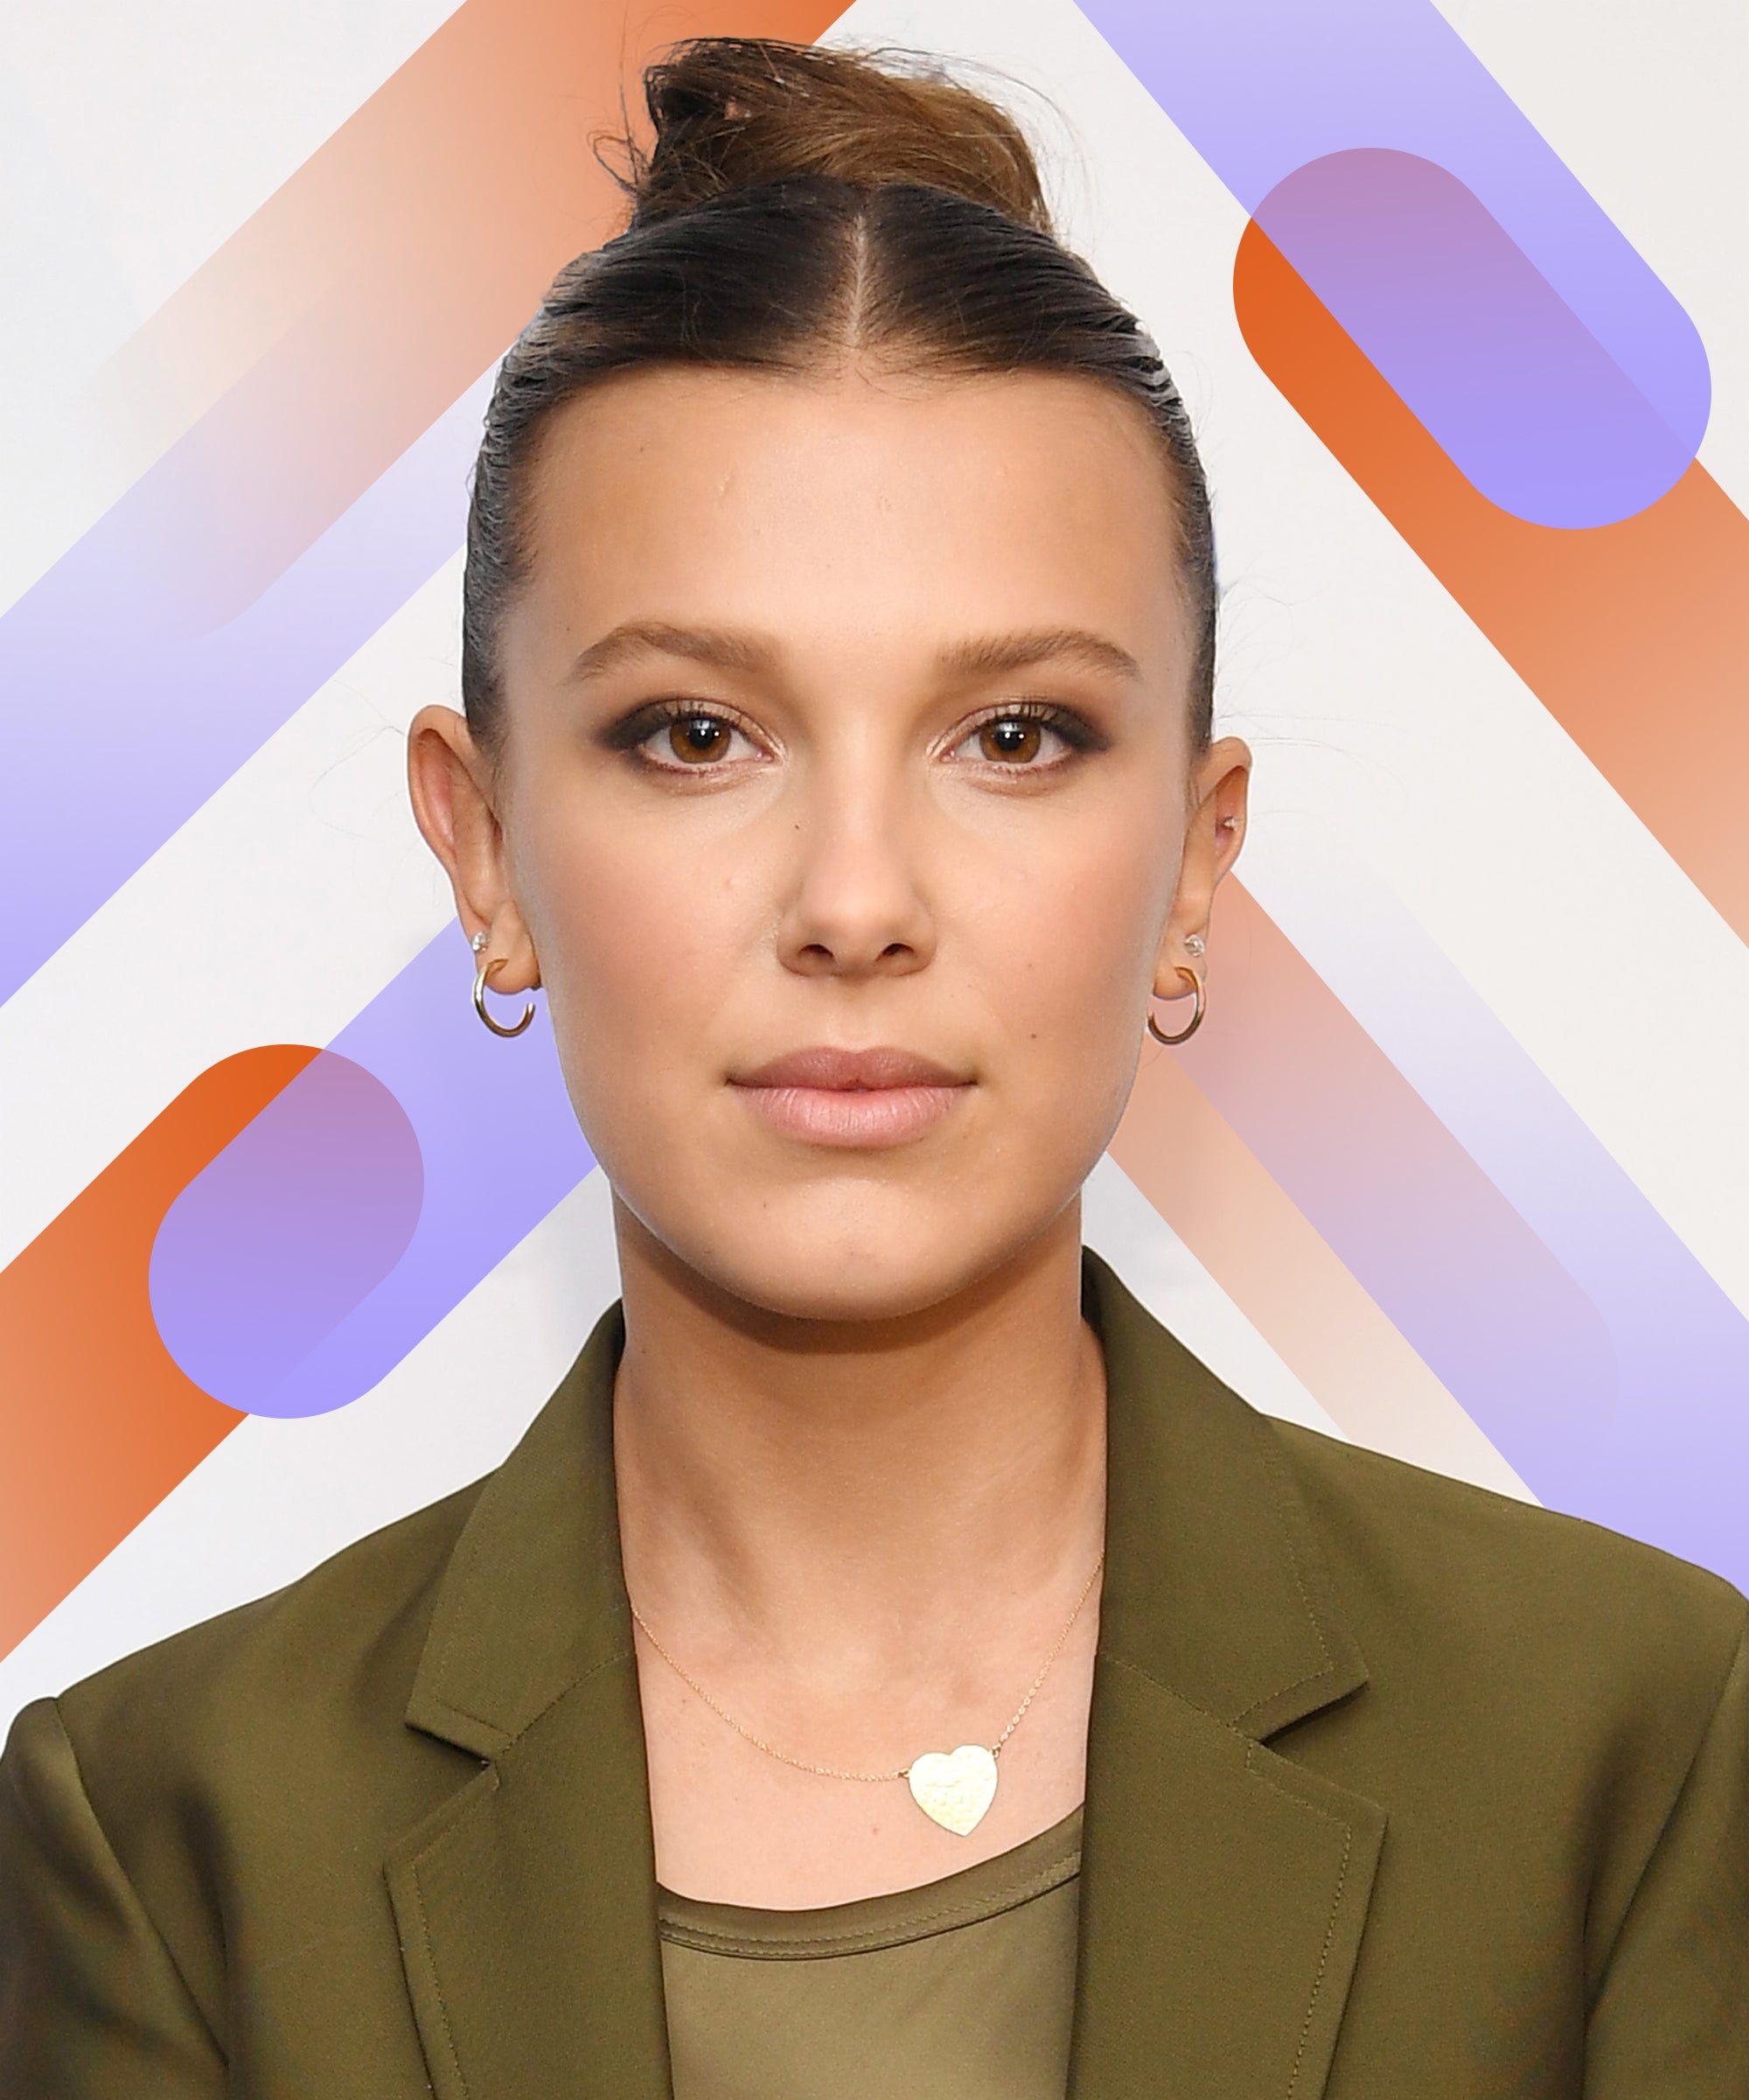 Stranger Things' Millie Bobby Brown is Already a Fashion Icon